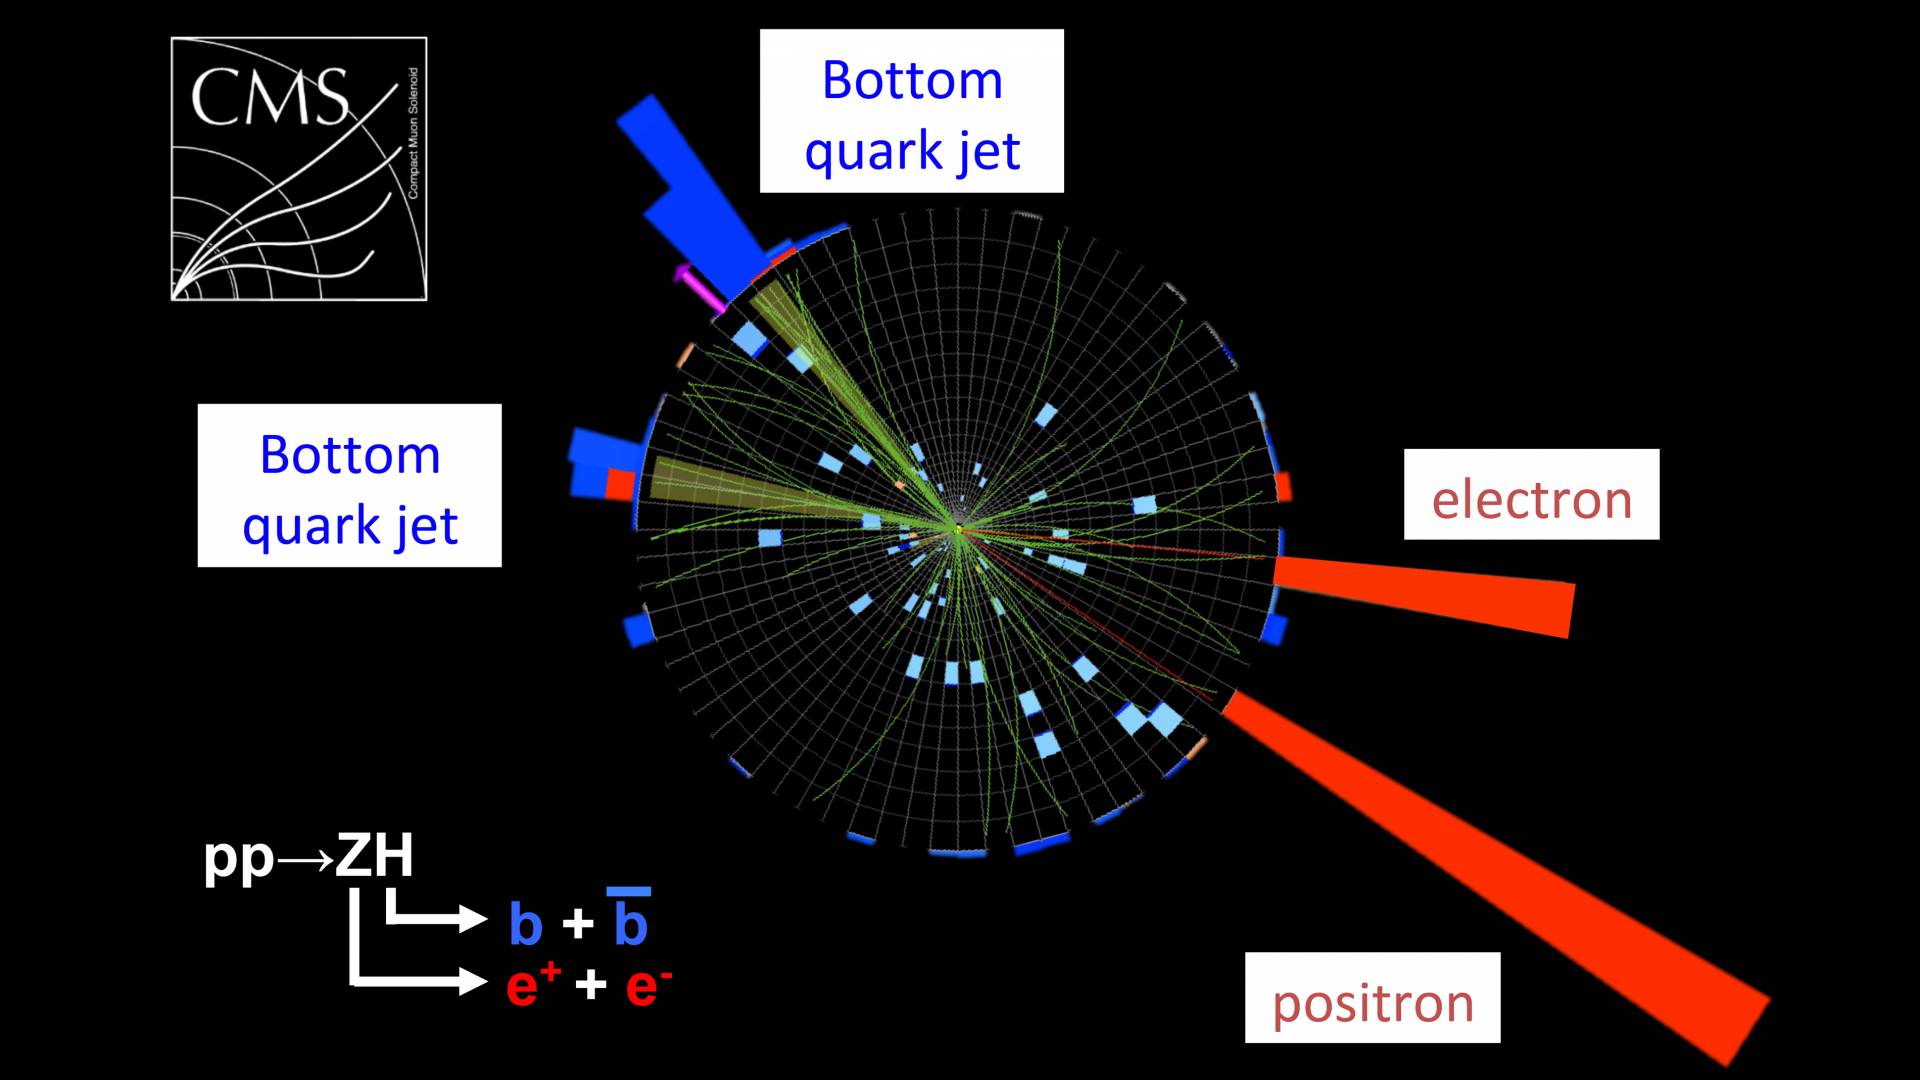 A graph showing the Higgs boson decaying